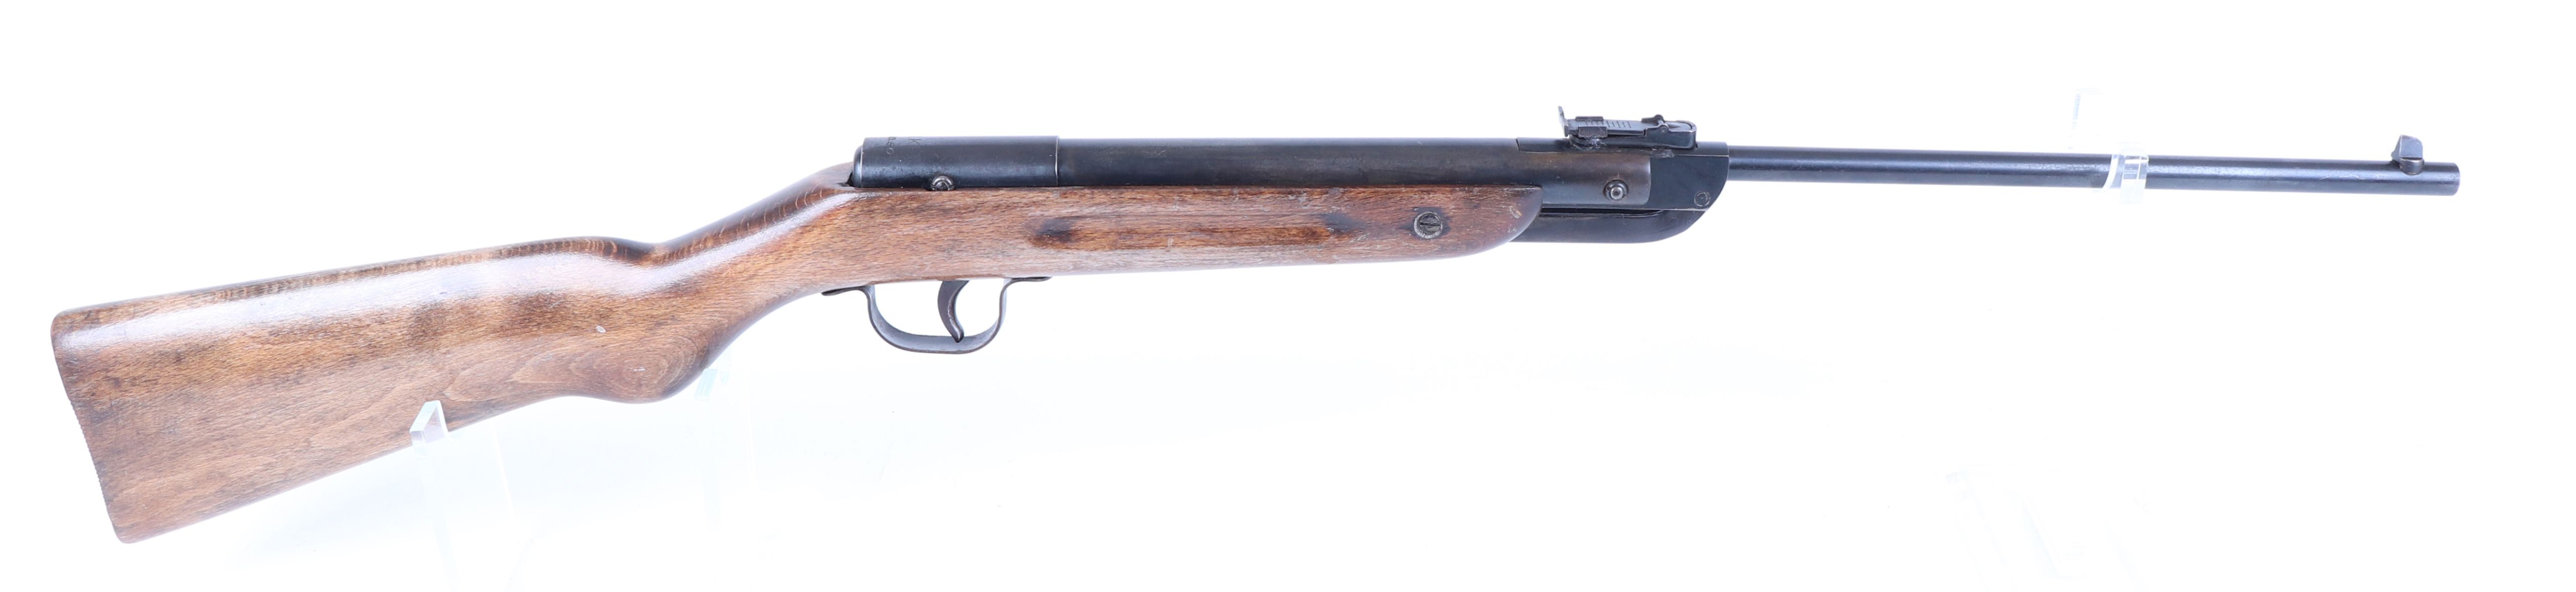 .177 Falke Mod 50 break barrel air rifle, open sights, nvn [Purchasers note: Collection in person o